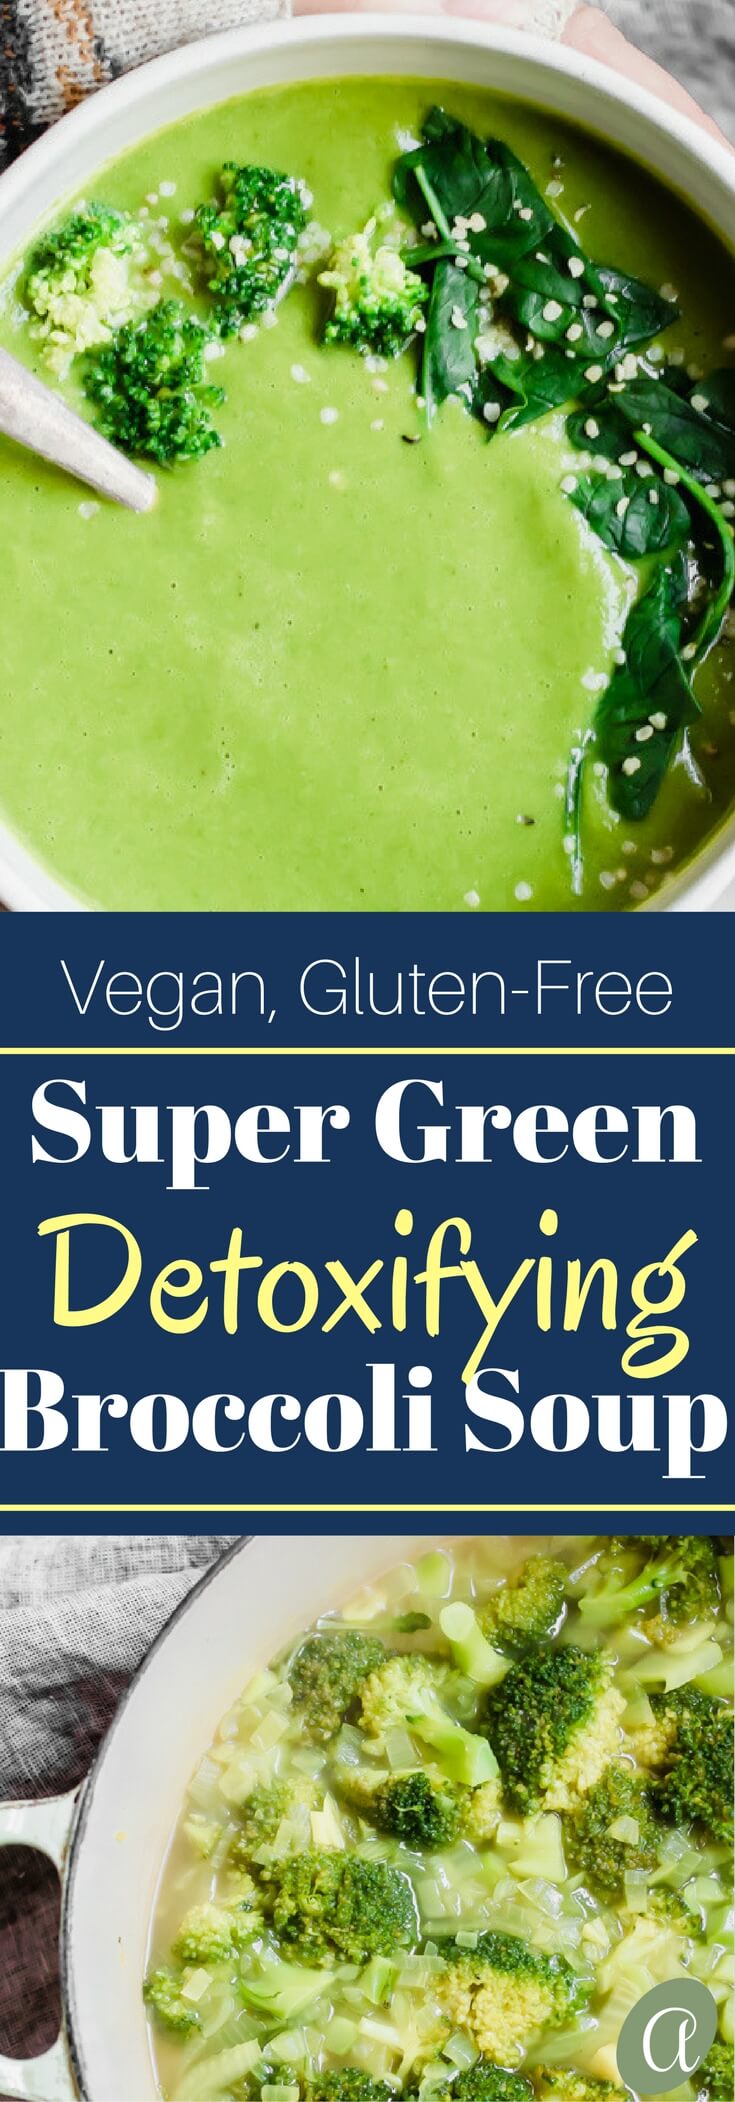 Healthy Detoxifying Creamy Broccoli Soup with spinach and kale. Healthy, satisfying, and nourishing. Paleo, vegan, gluten free, healthy soup!